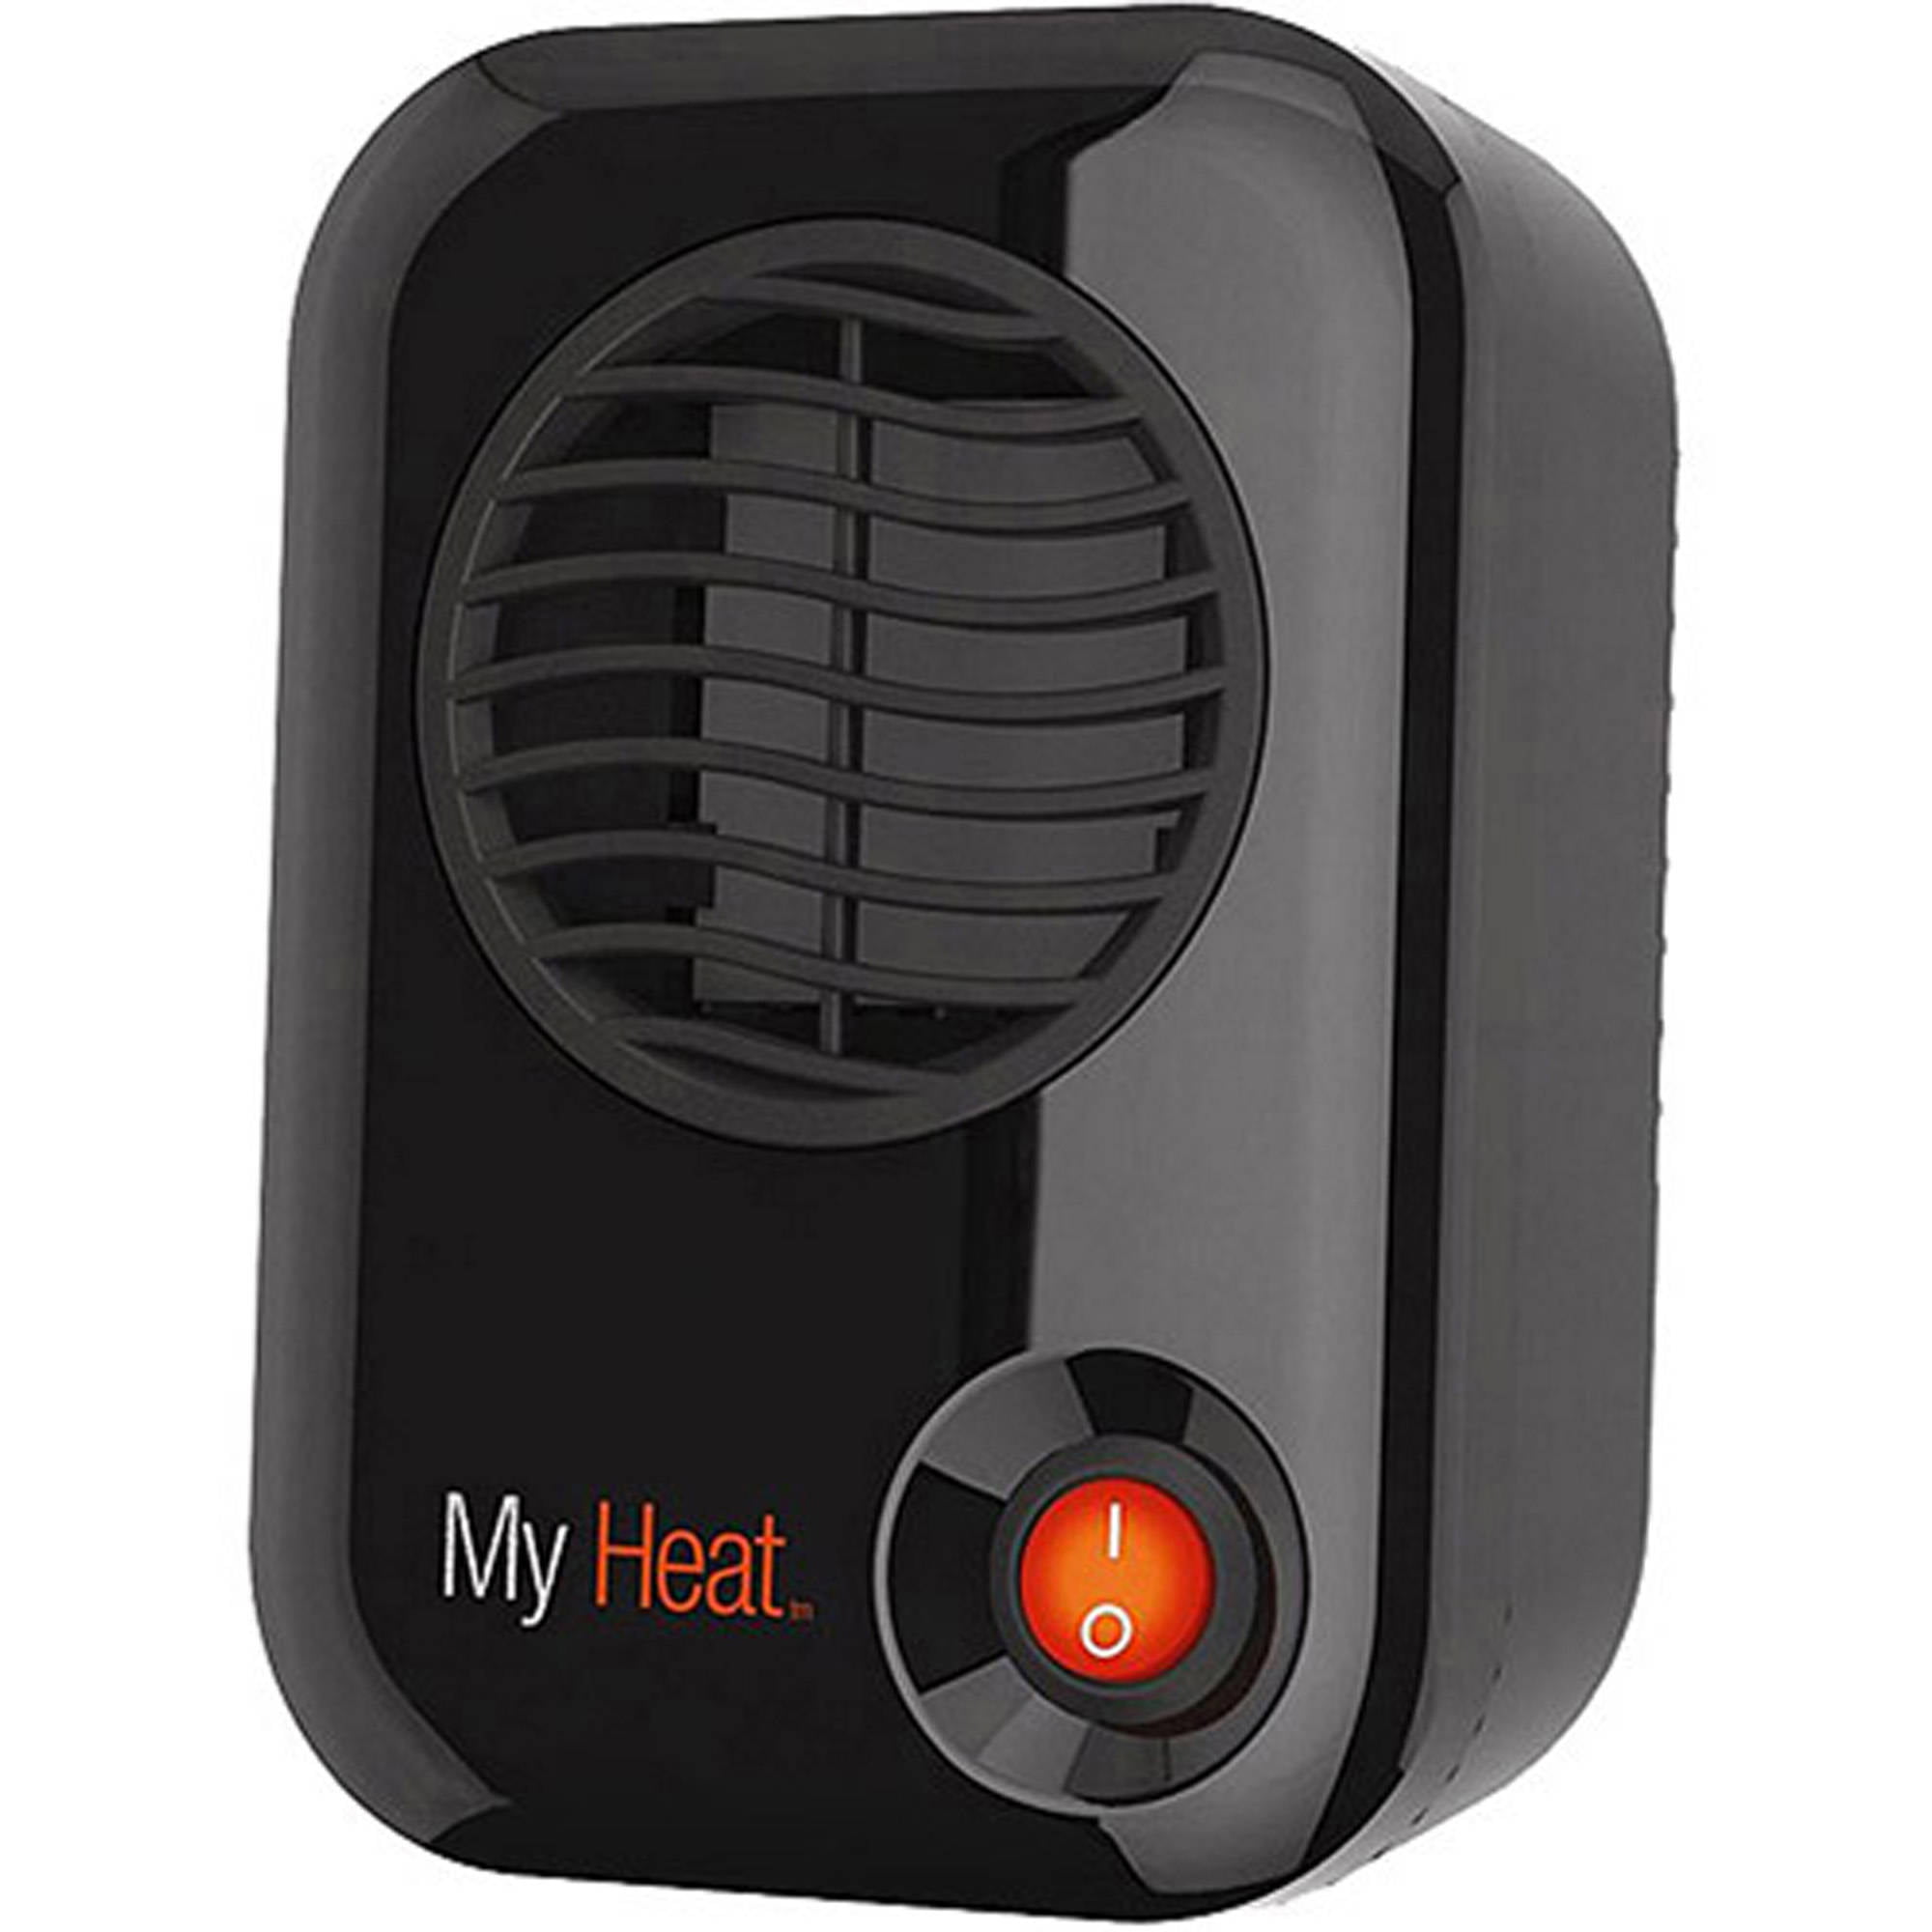 What are some reviews of eheat heaters?